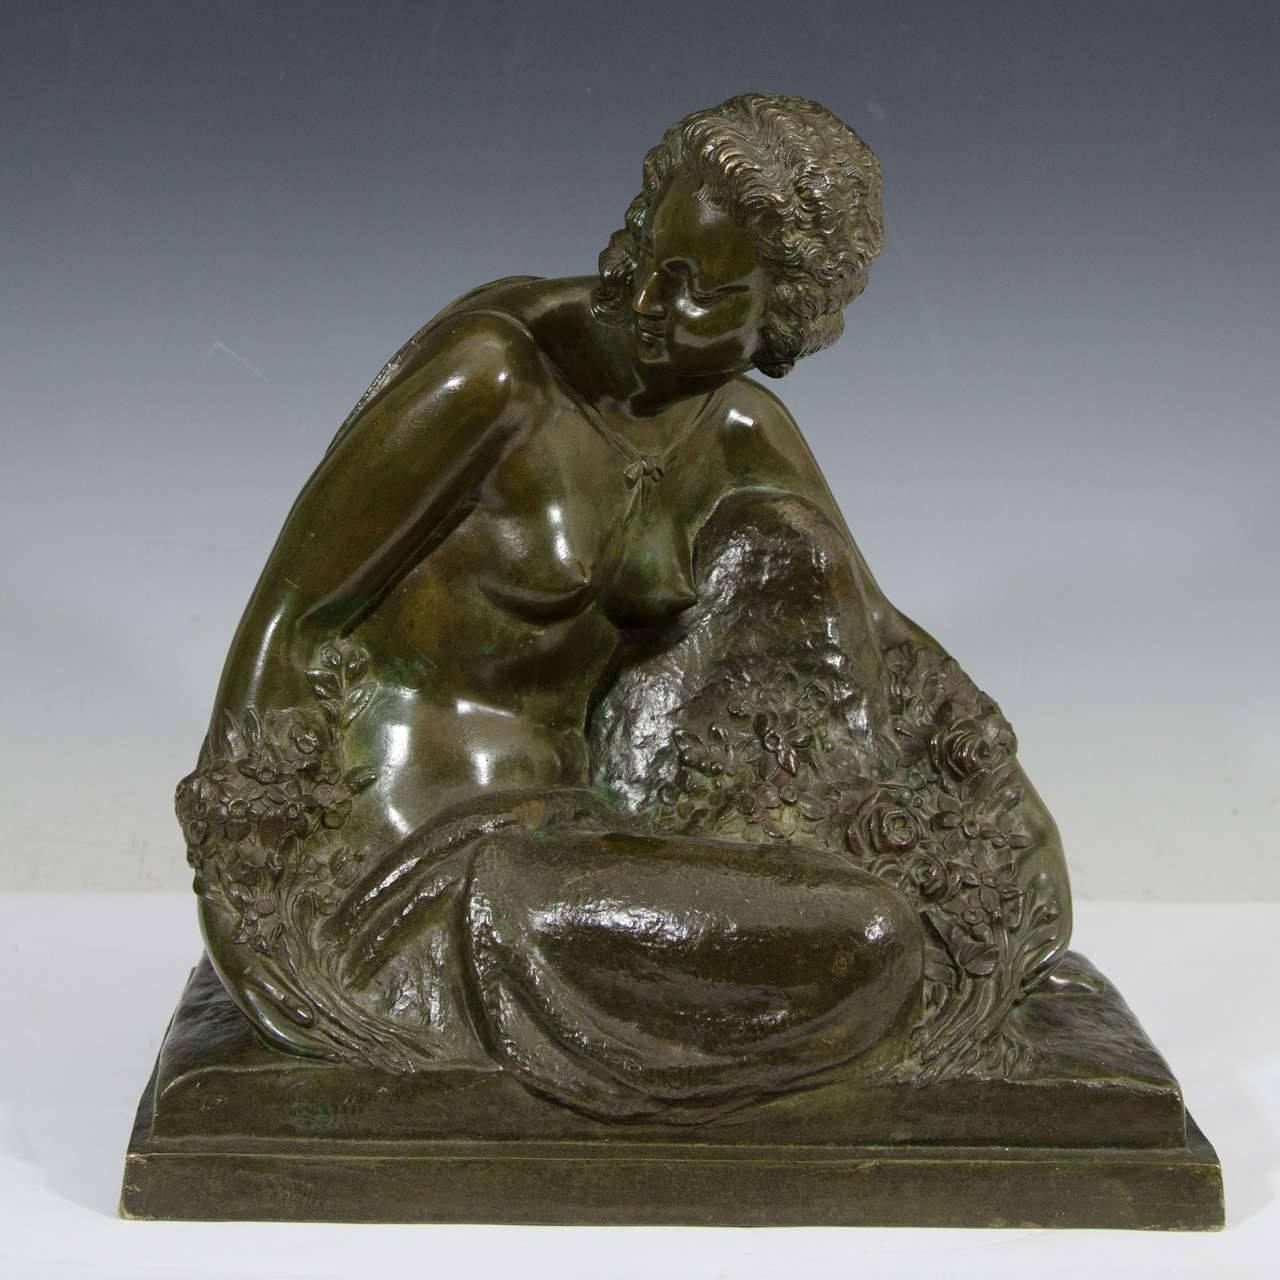 An Art Deco bronze sculpture of a seated semi-nude woman by Marcel-André Bouraine, French, 1886-1948.